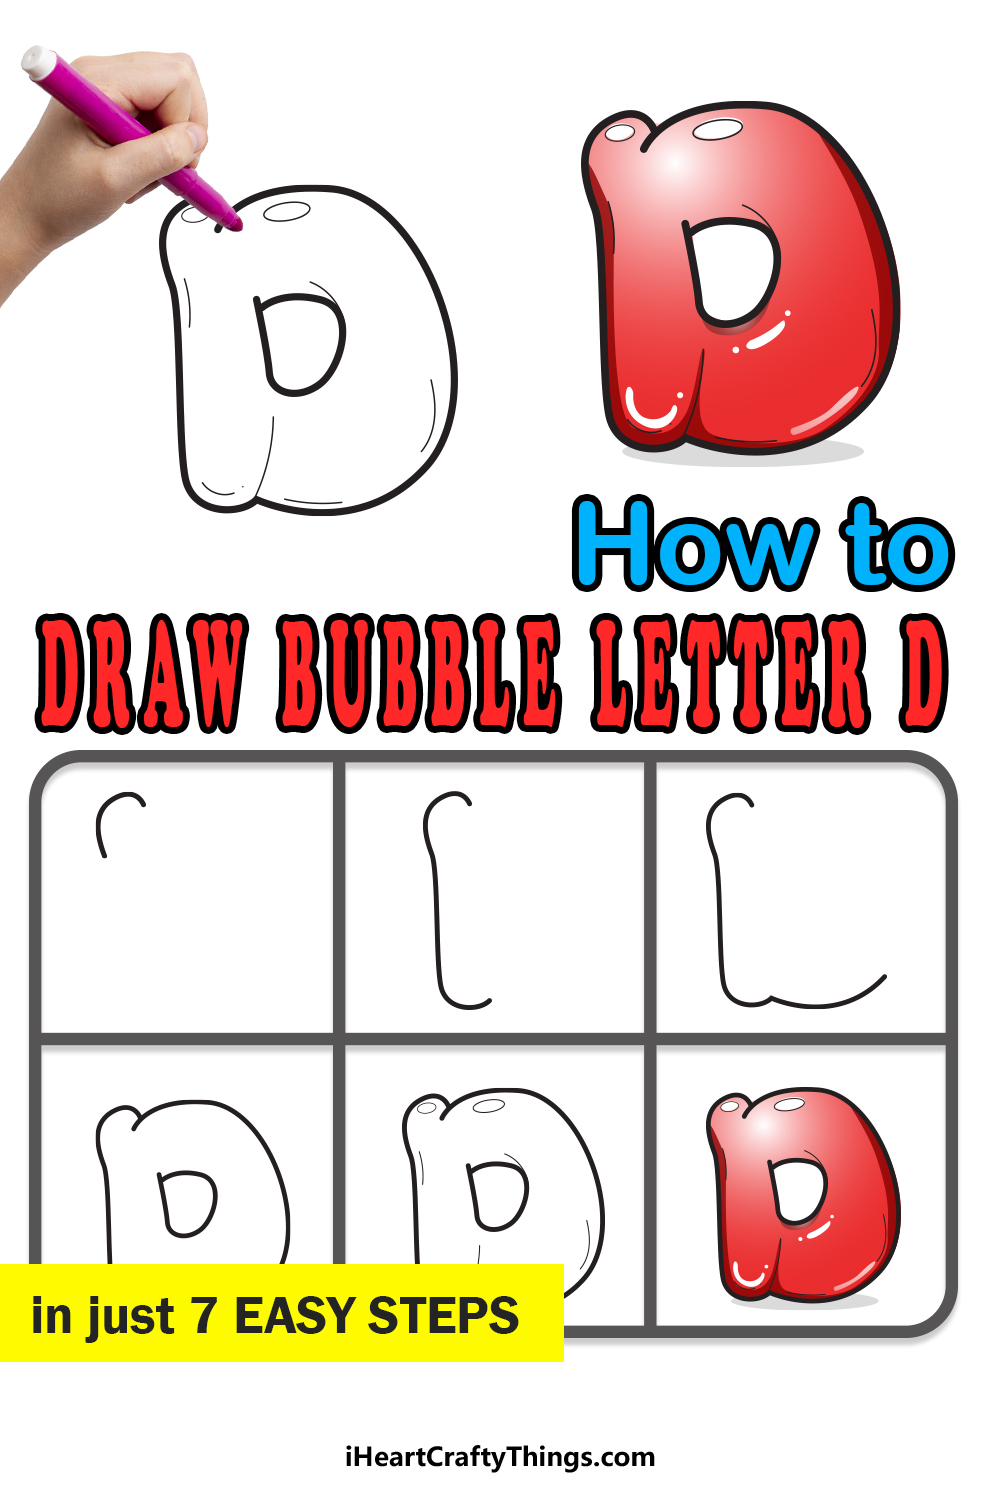 How To Draw Your Own Bubble D step by step guide